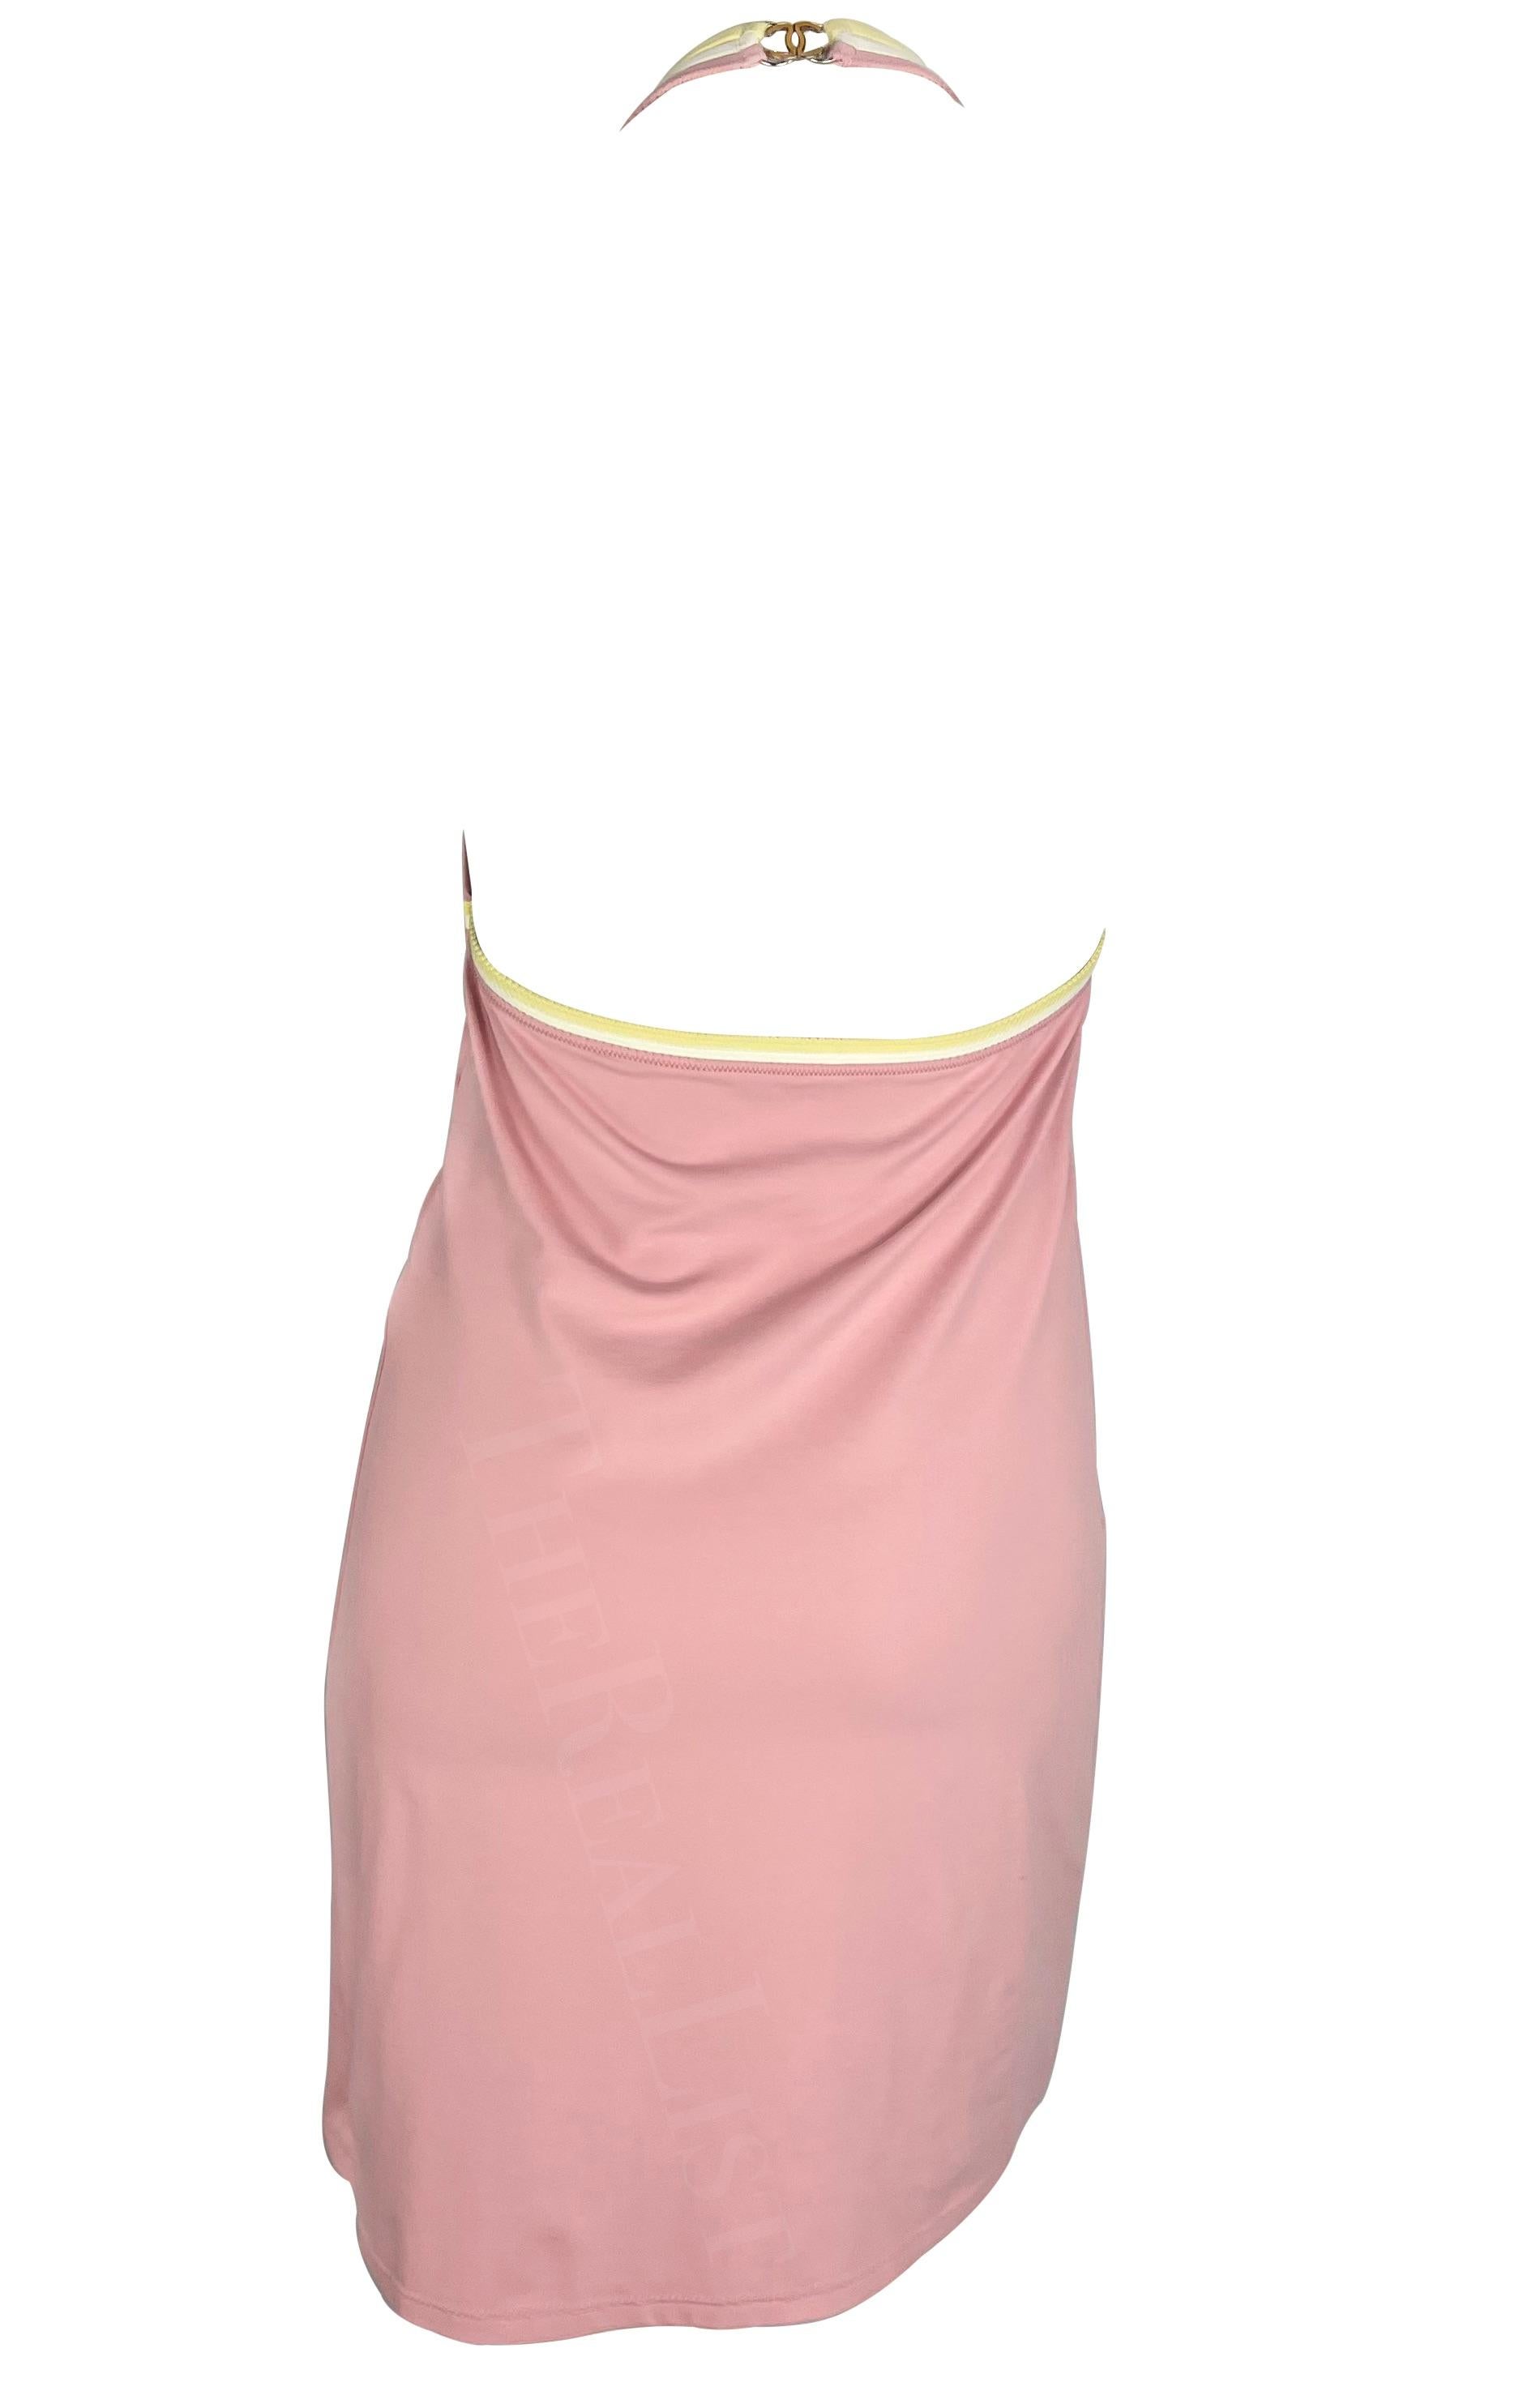 2004 Cruise Chanel by Karl Lagerfeld Pink Bodycon Halterneck Mini Dress In Excellent Condition For Sale In West Hollywood, CA